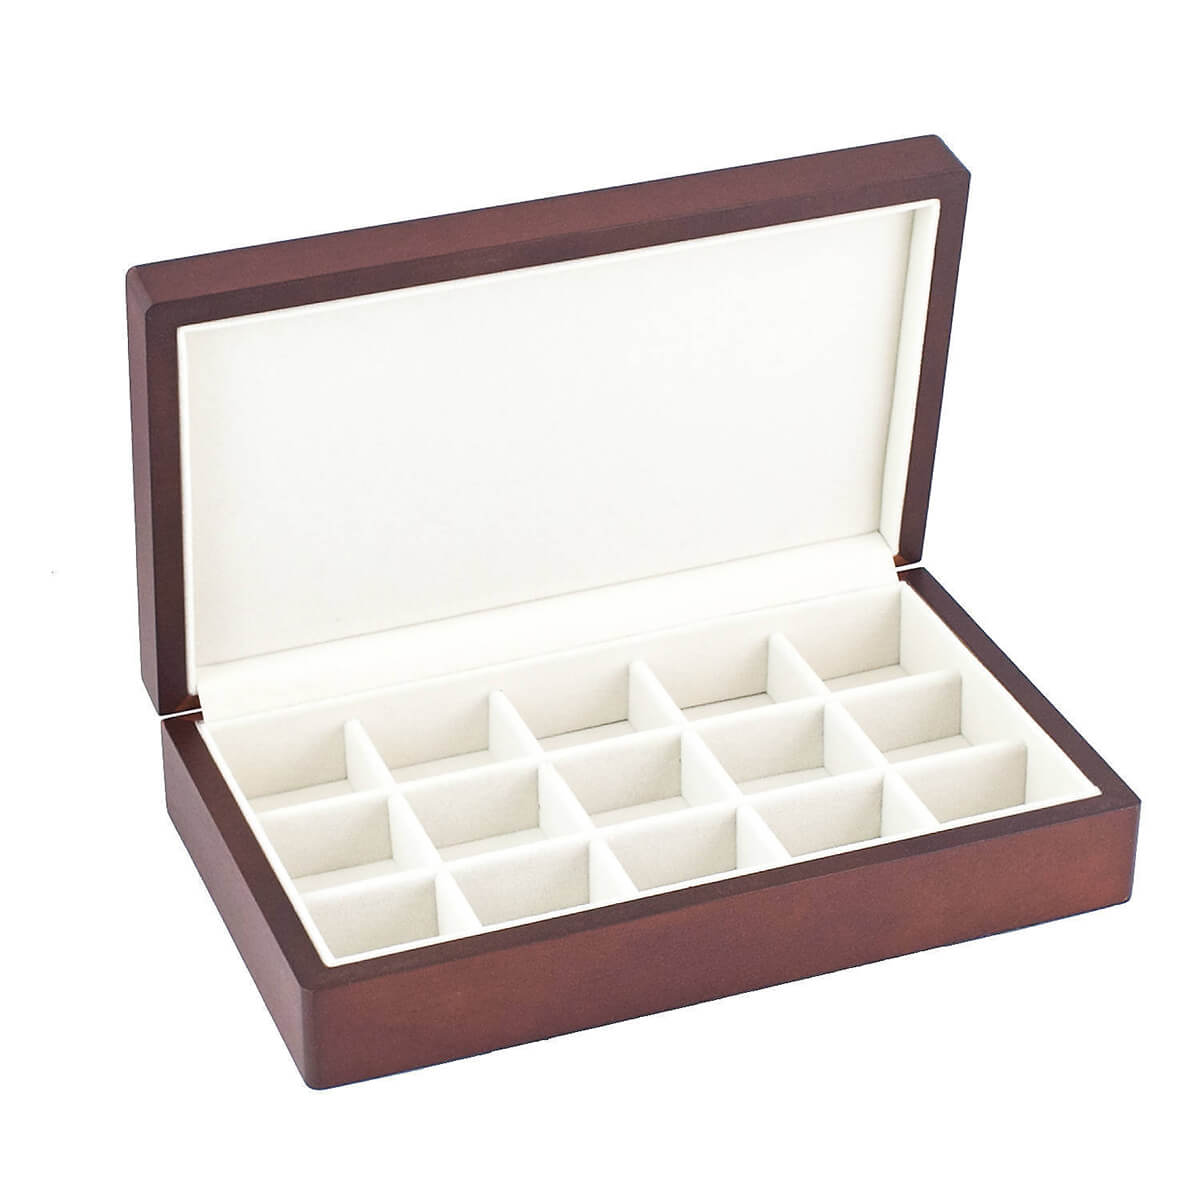 Wooden Jewelry Storage Design with Engraved Personalization